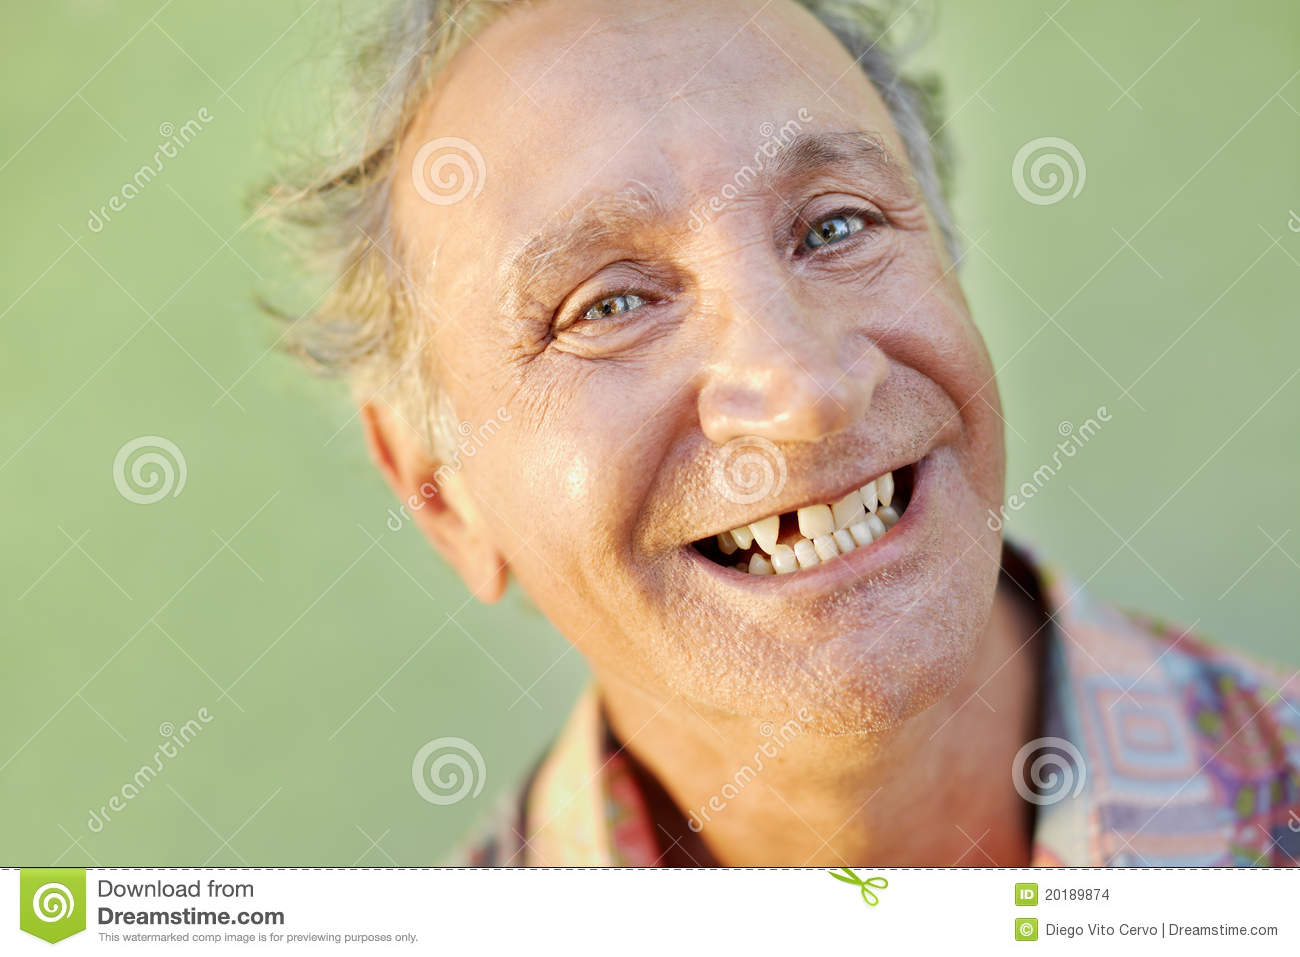 Toothless Smile Clipart Aged Toothless Man Smiling At